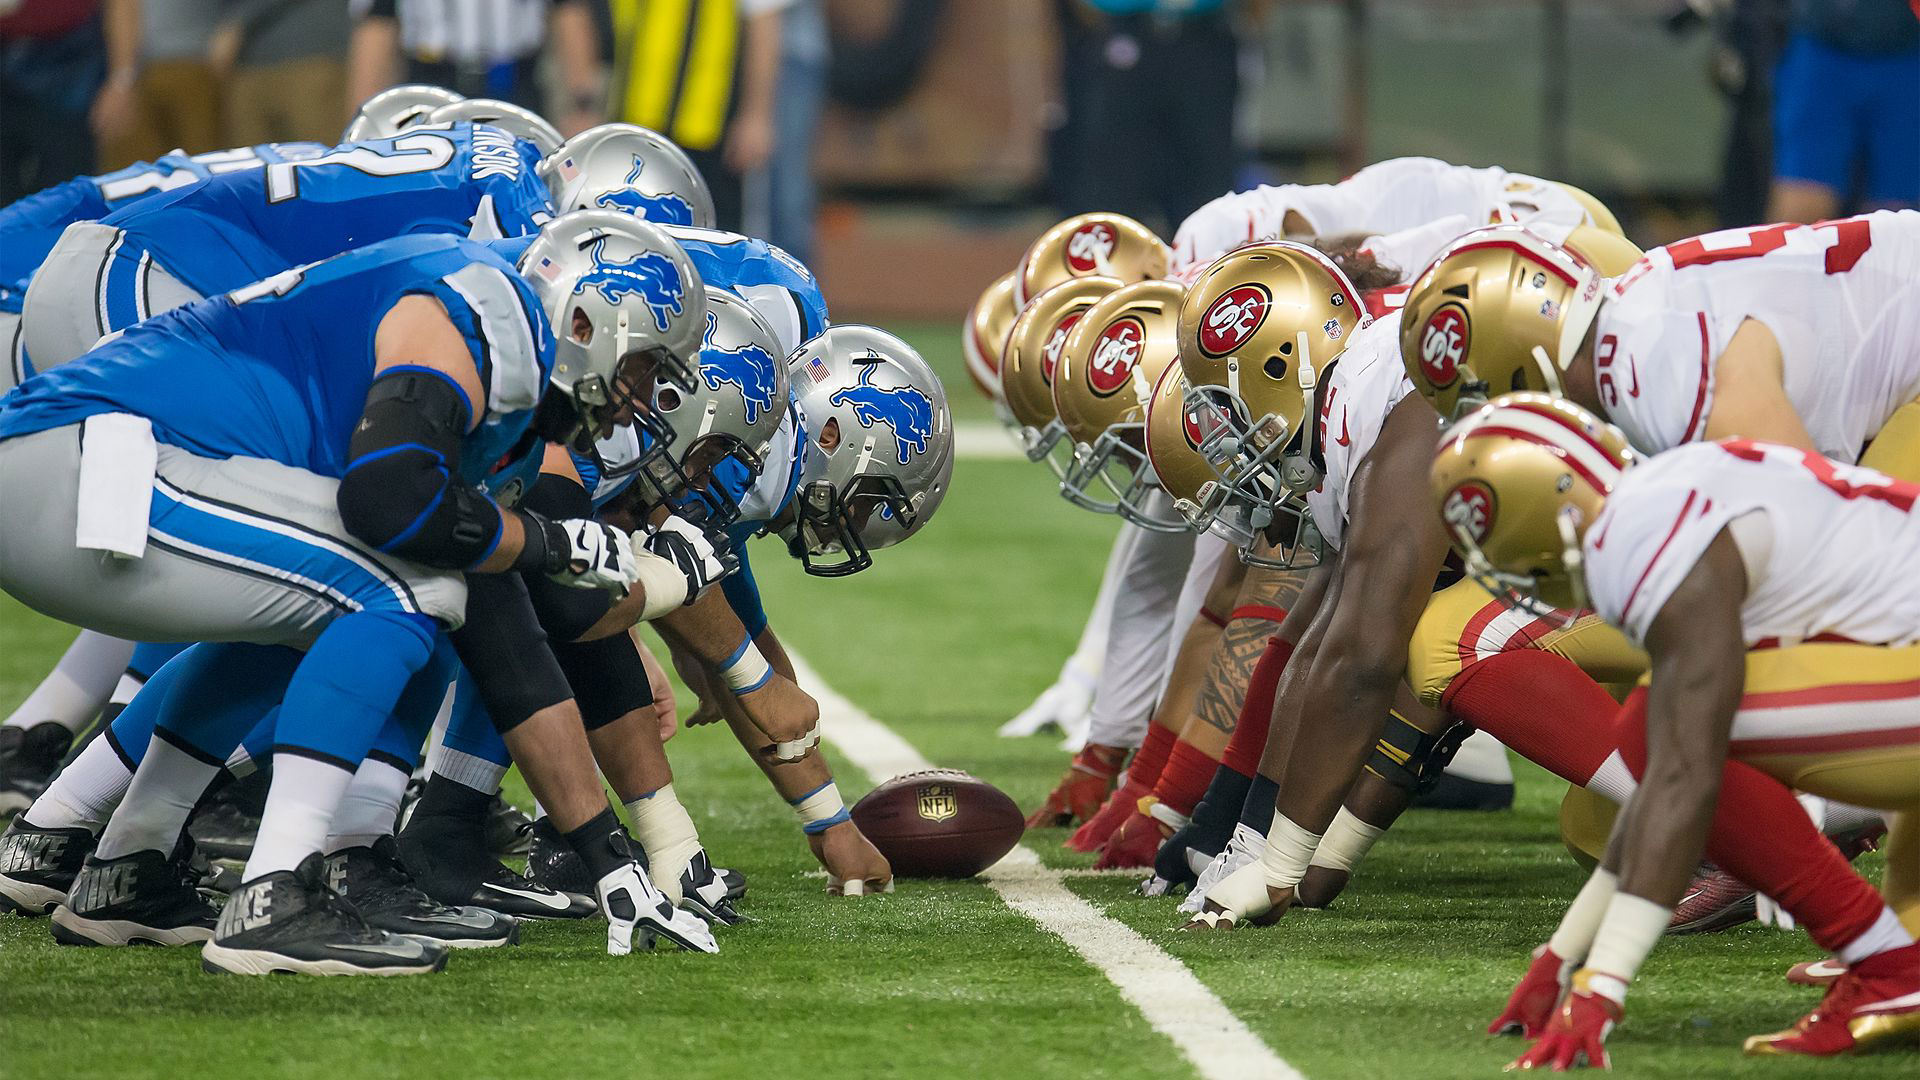 Lions vs. 49ers NFC Championship game date, time scheduled